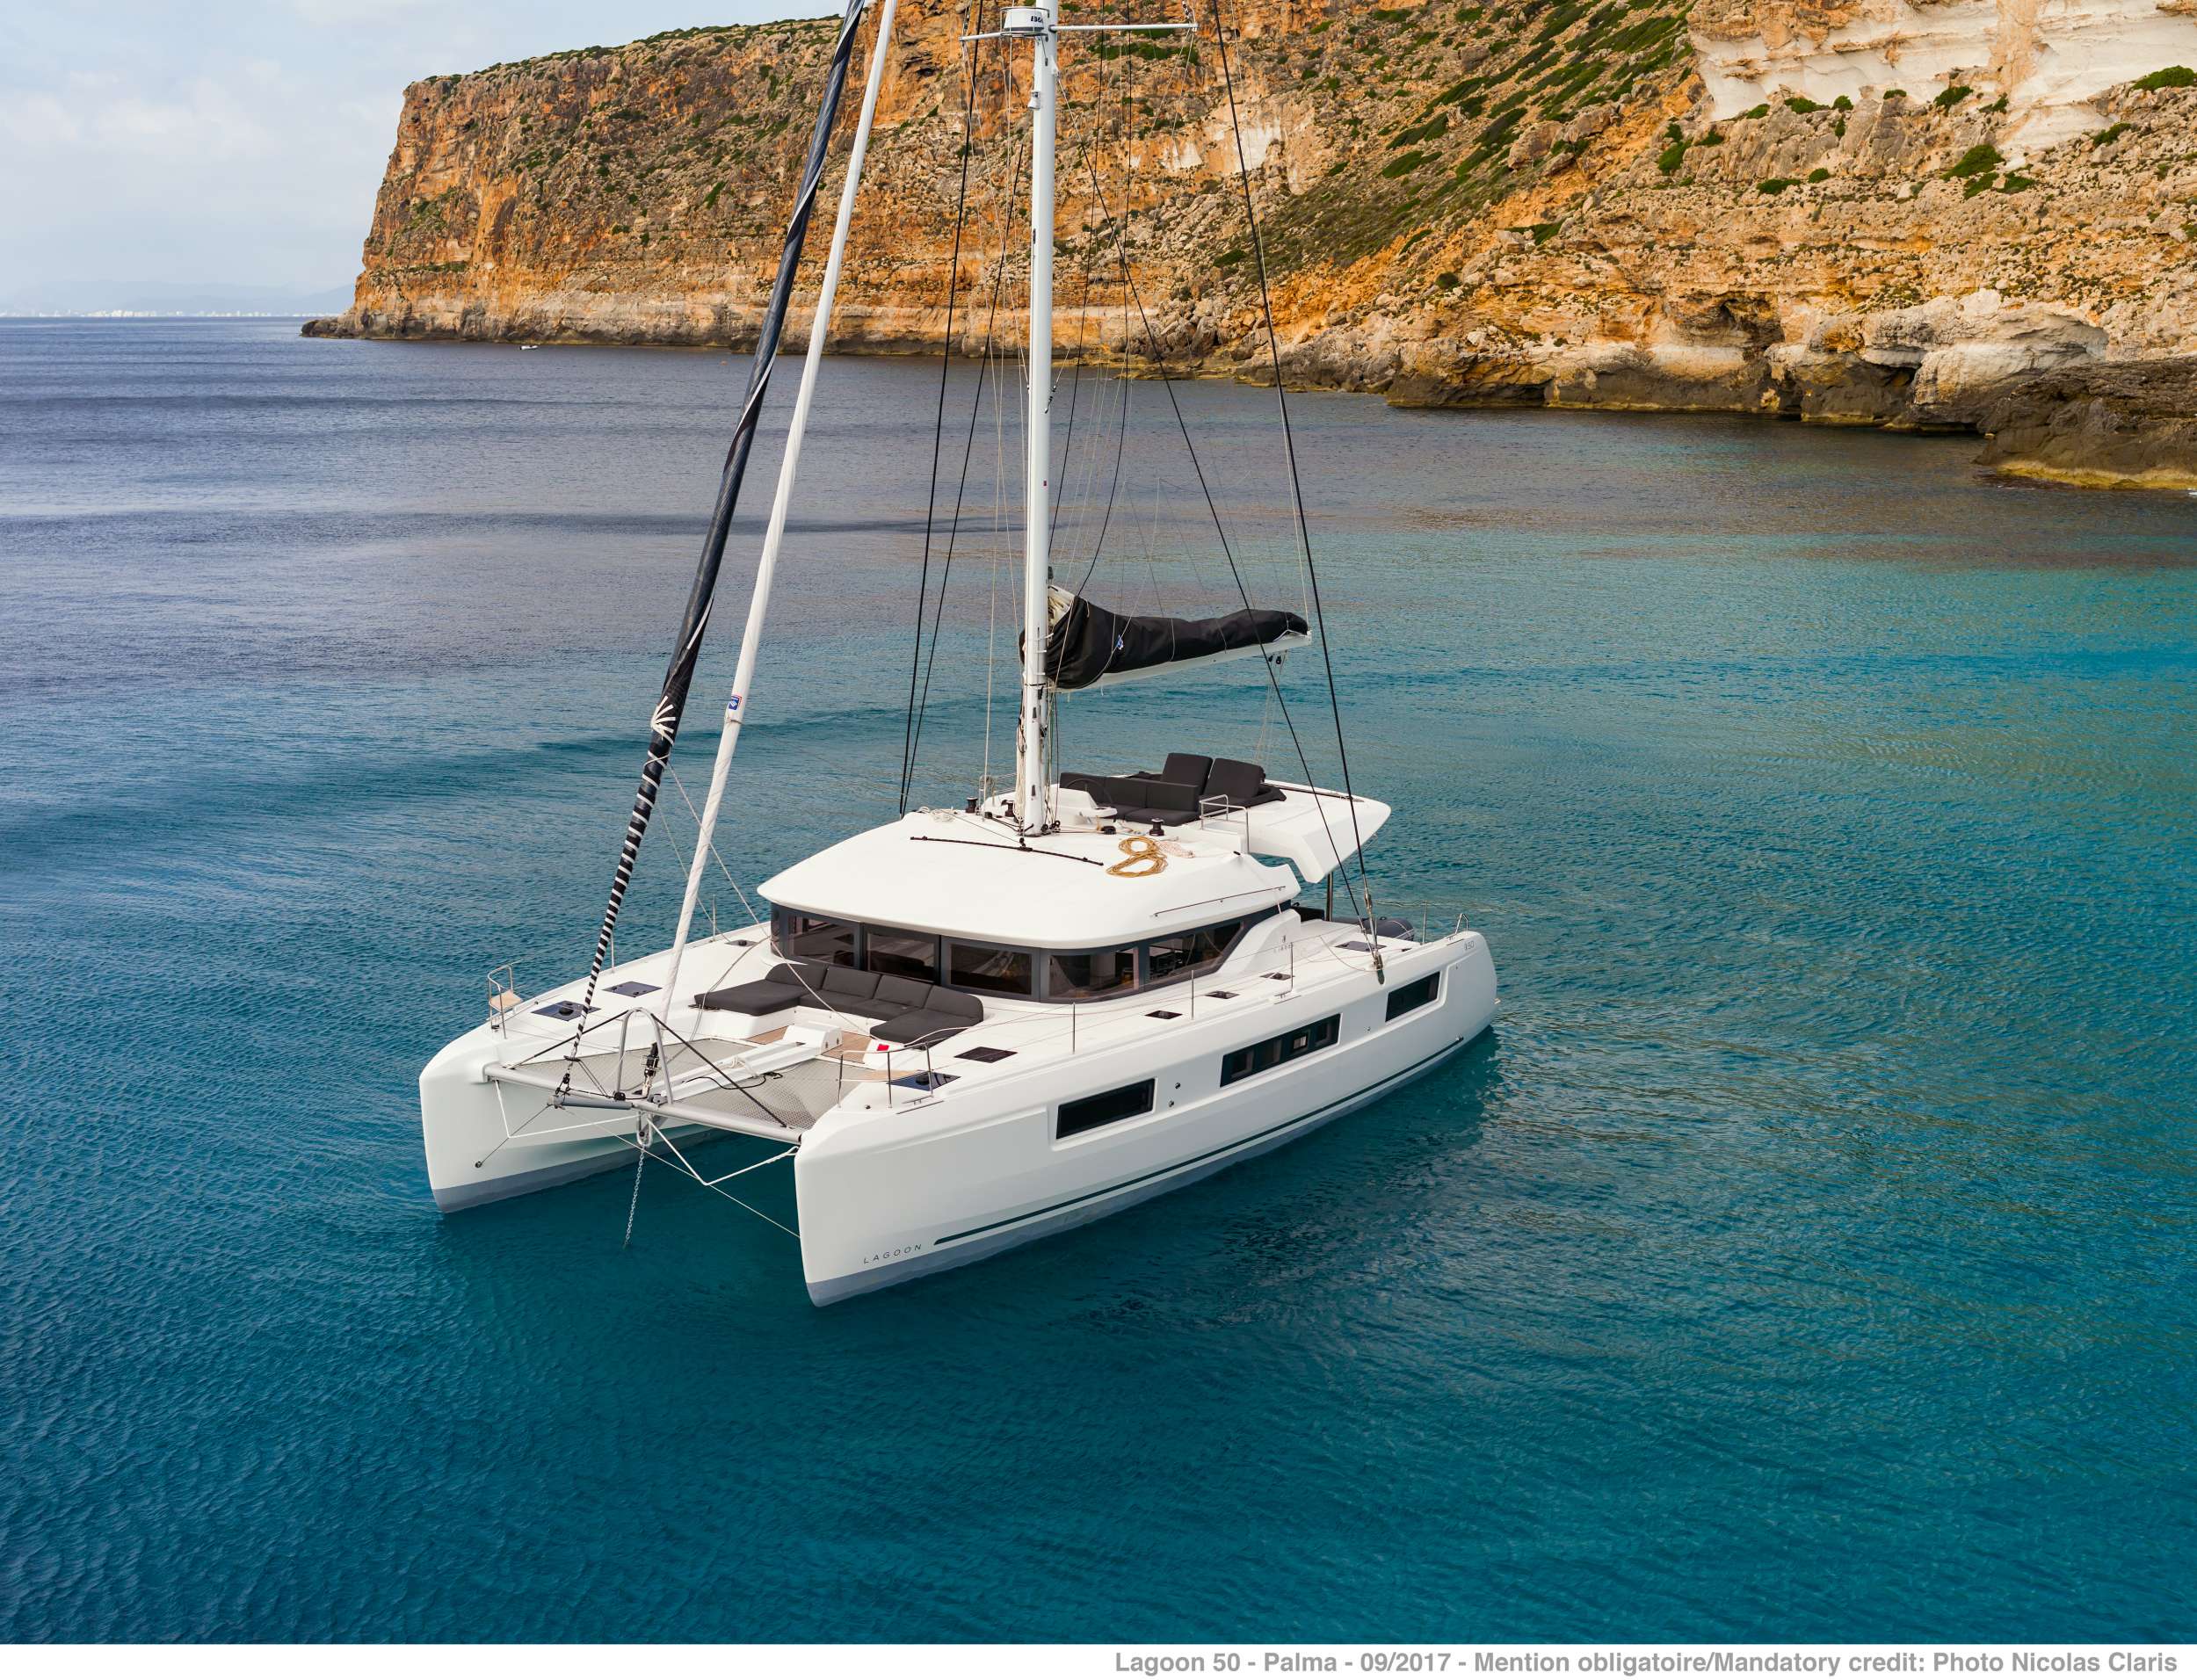 ONEIDA 2 - Yacht Charter Syros & Boat hire in Greece 1